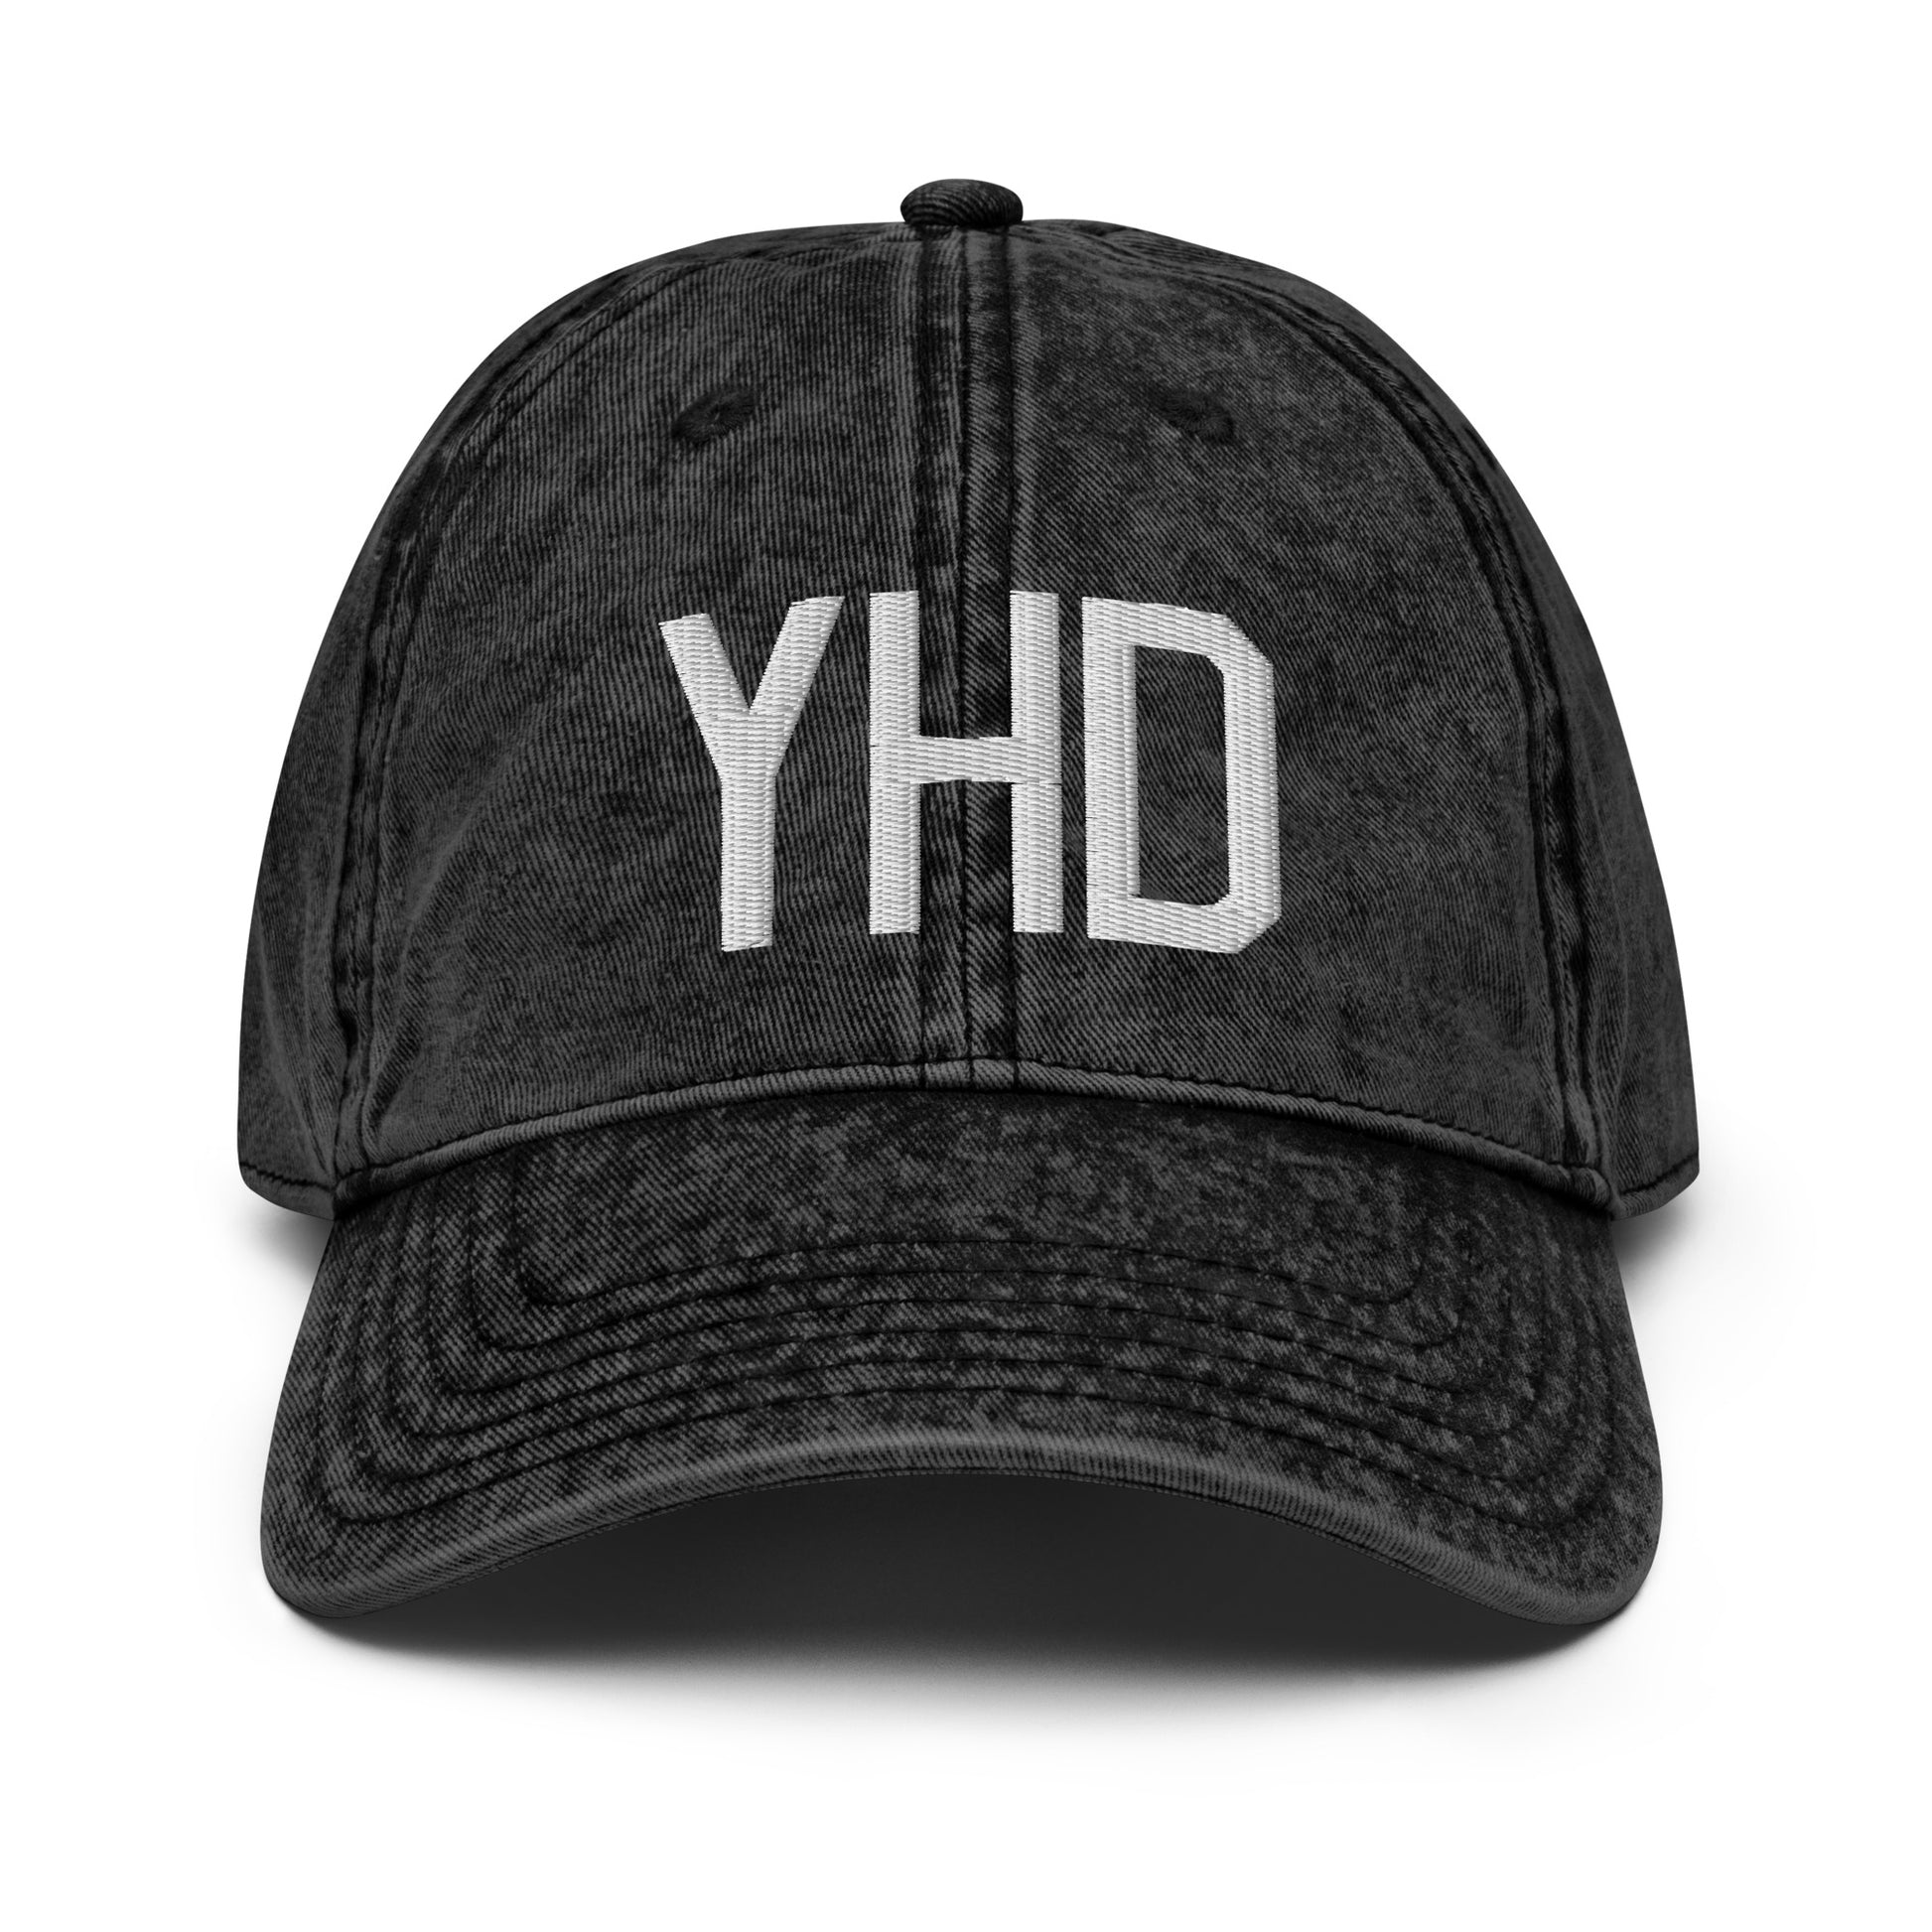 Airport Code Twill Cap - White • YHD Dryden • YHM Designs - Image 14